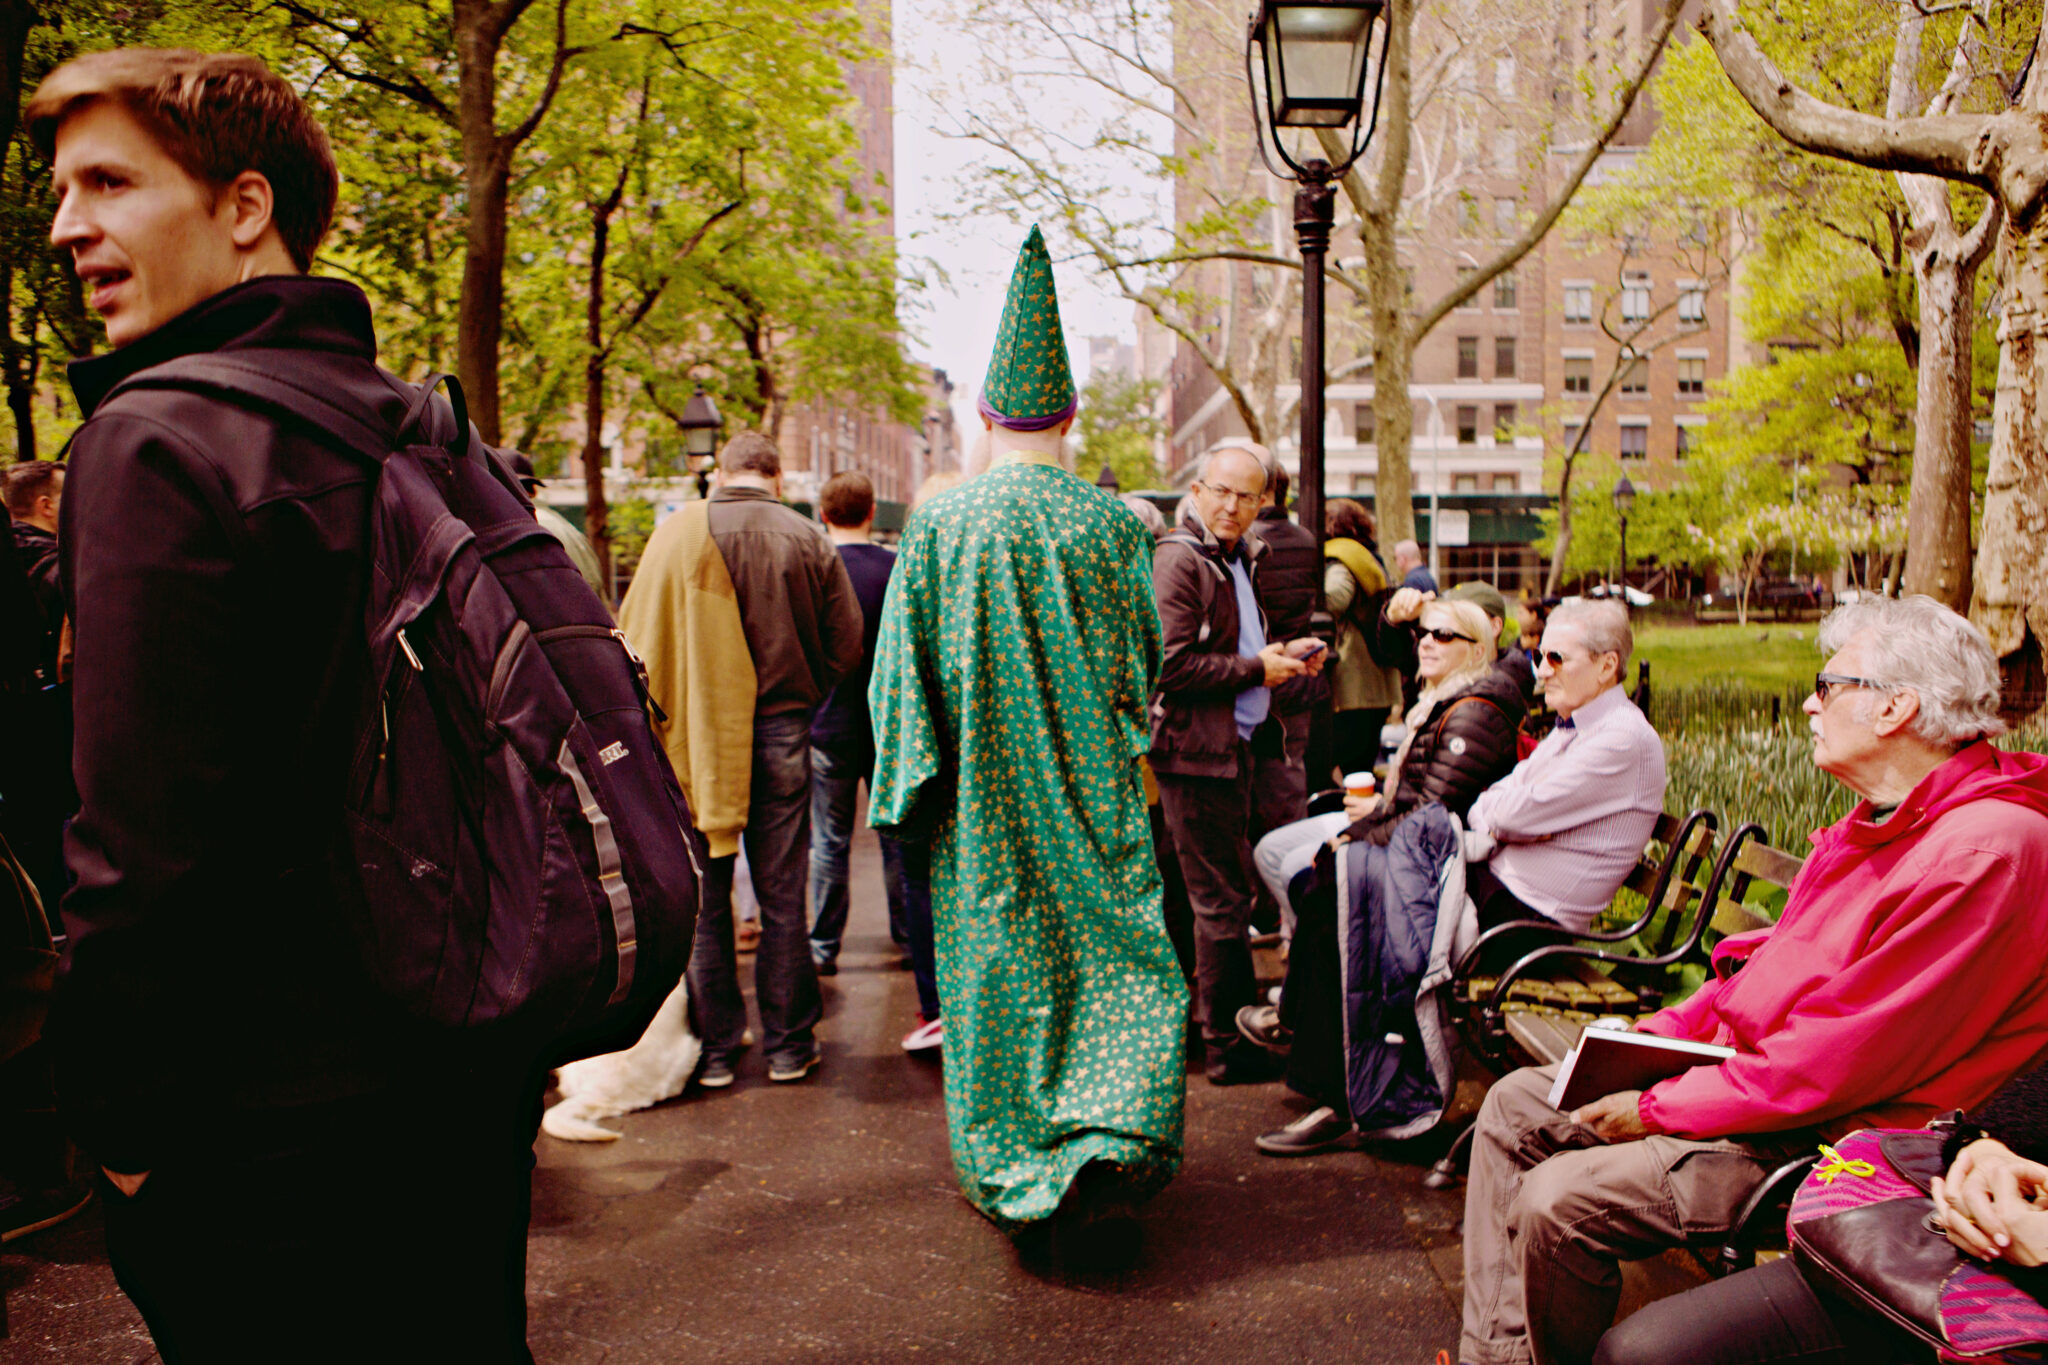 Devin the Wizard, wearing his green wizard hat and robe, walking through a crowd of people in the city.